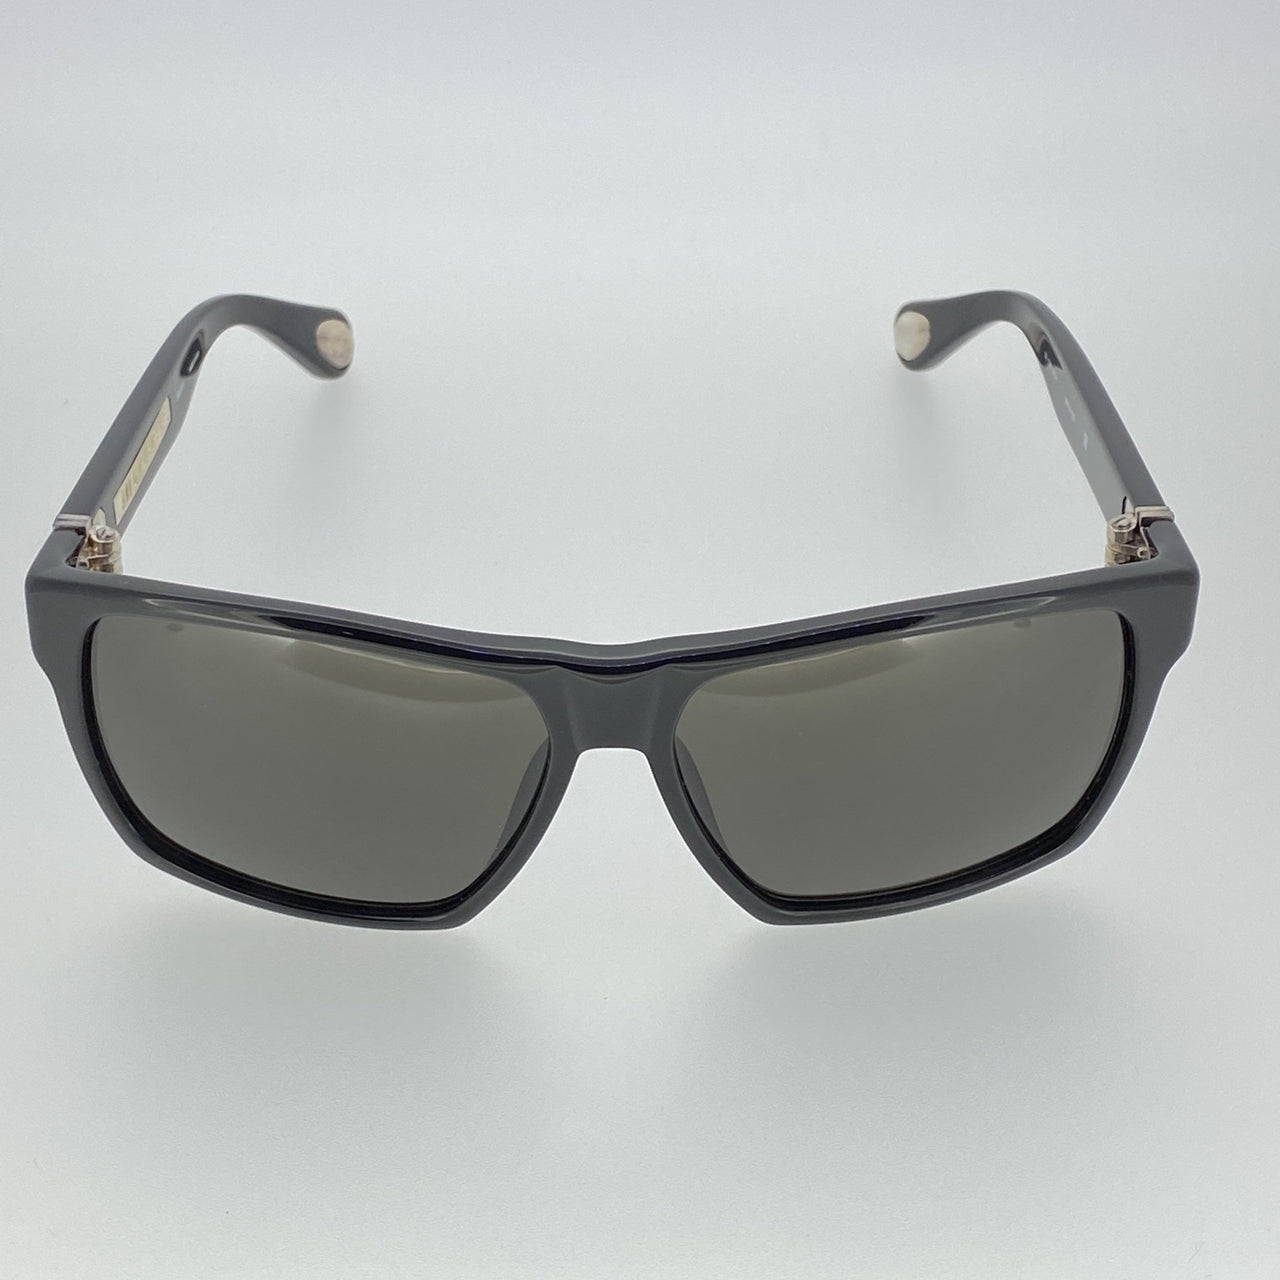 Ann Demeulemeester Sunglasses Angular Black 925 Silver with Grey Lenses Category 3 Dark Tint AD37C1SUN - Watches & Crystals